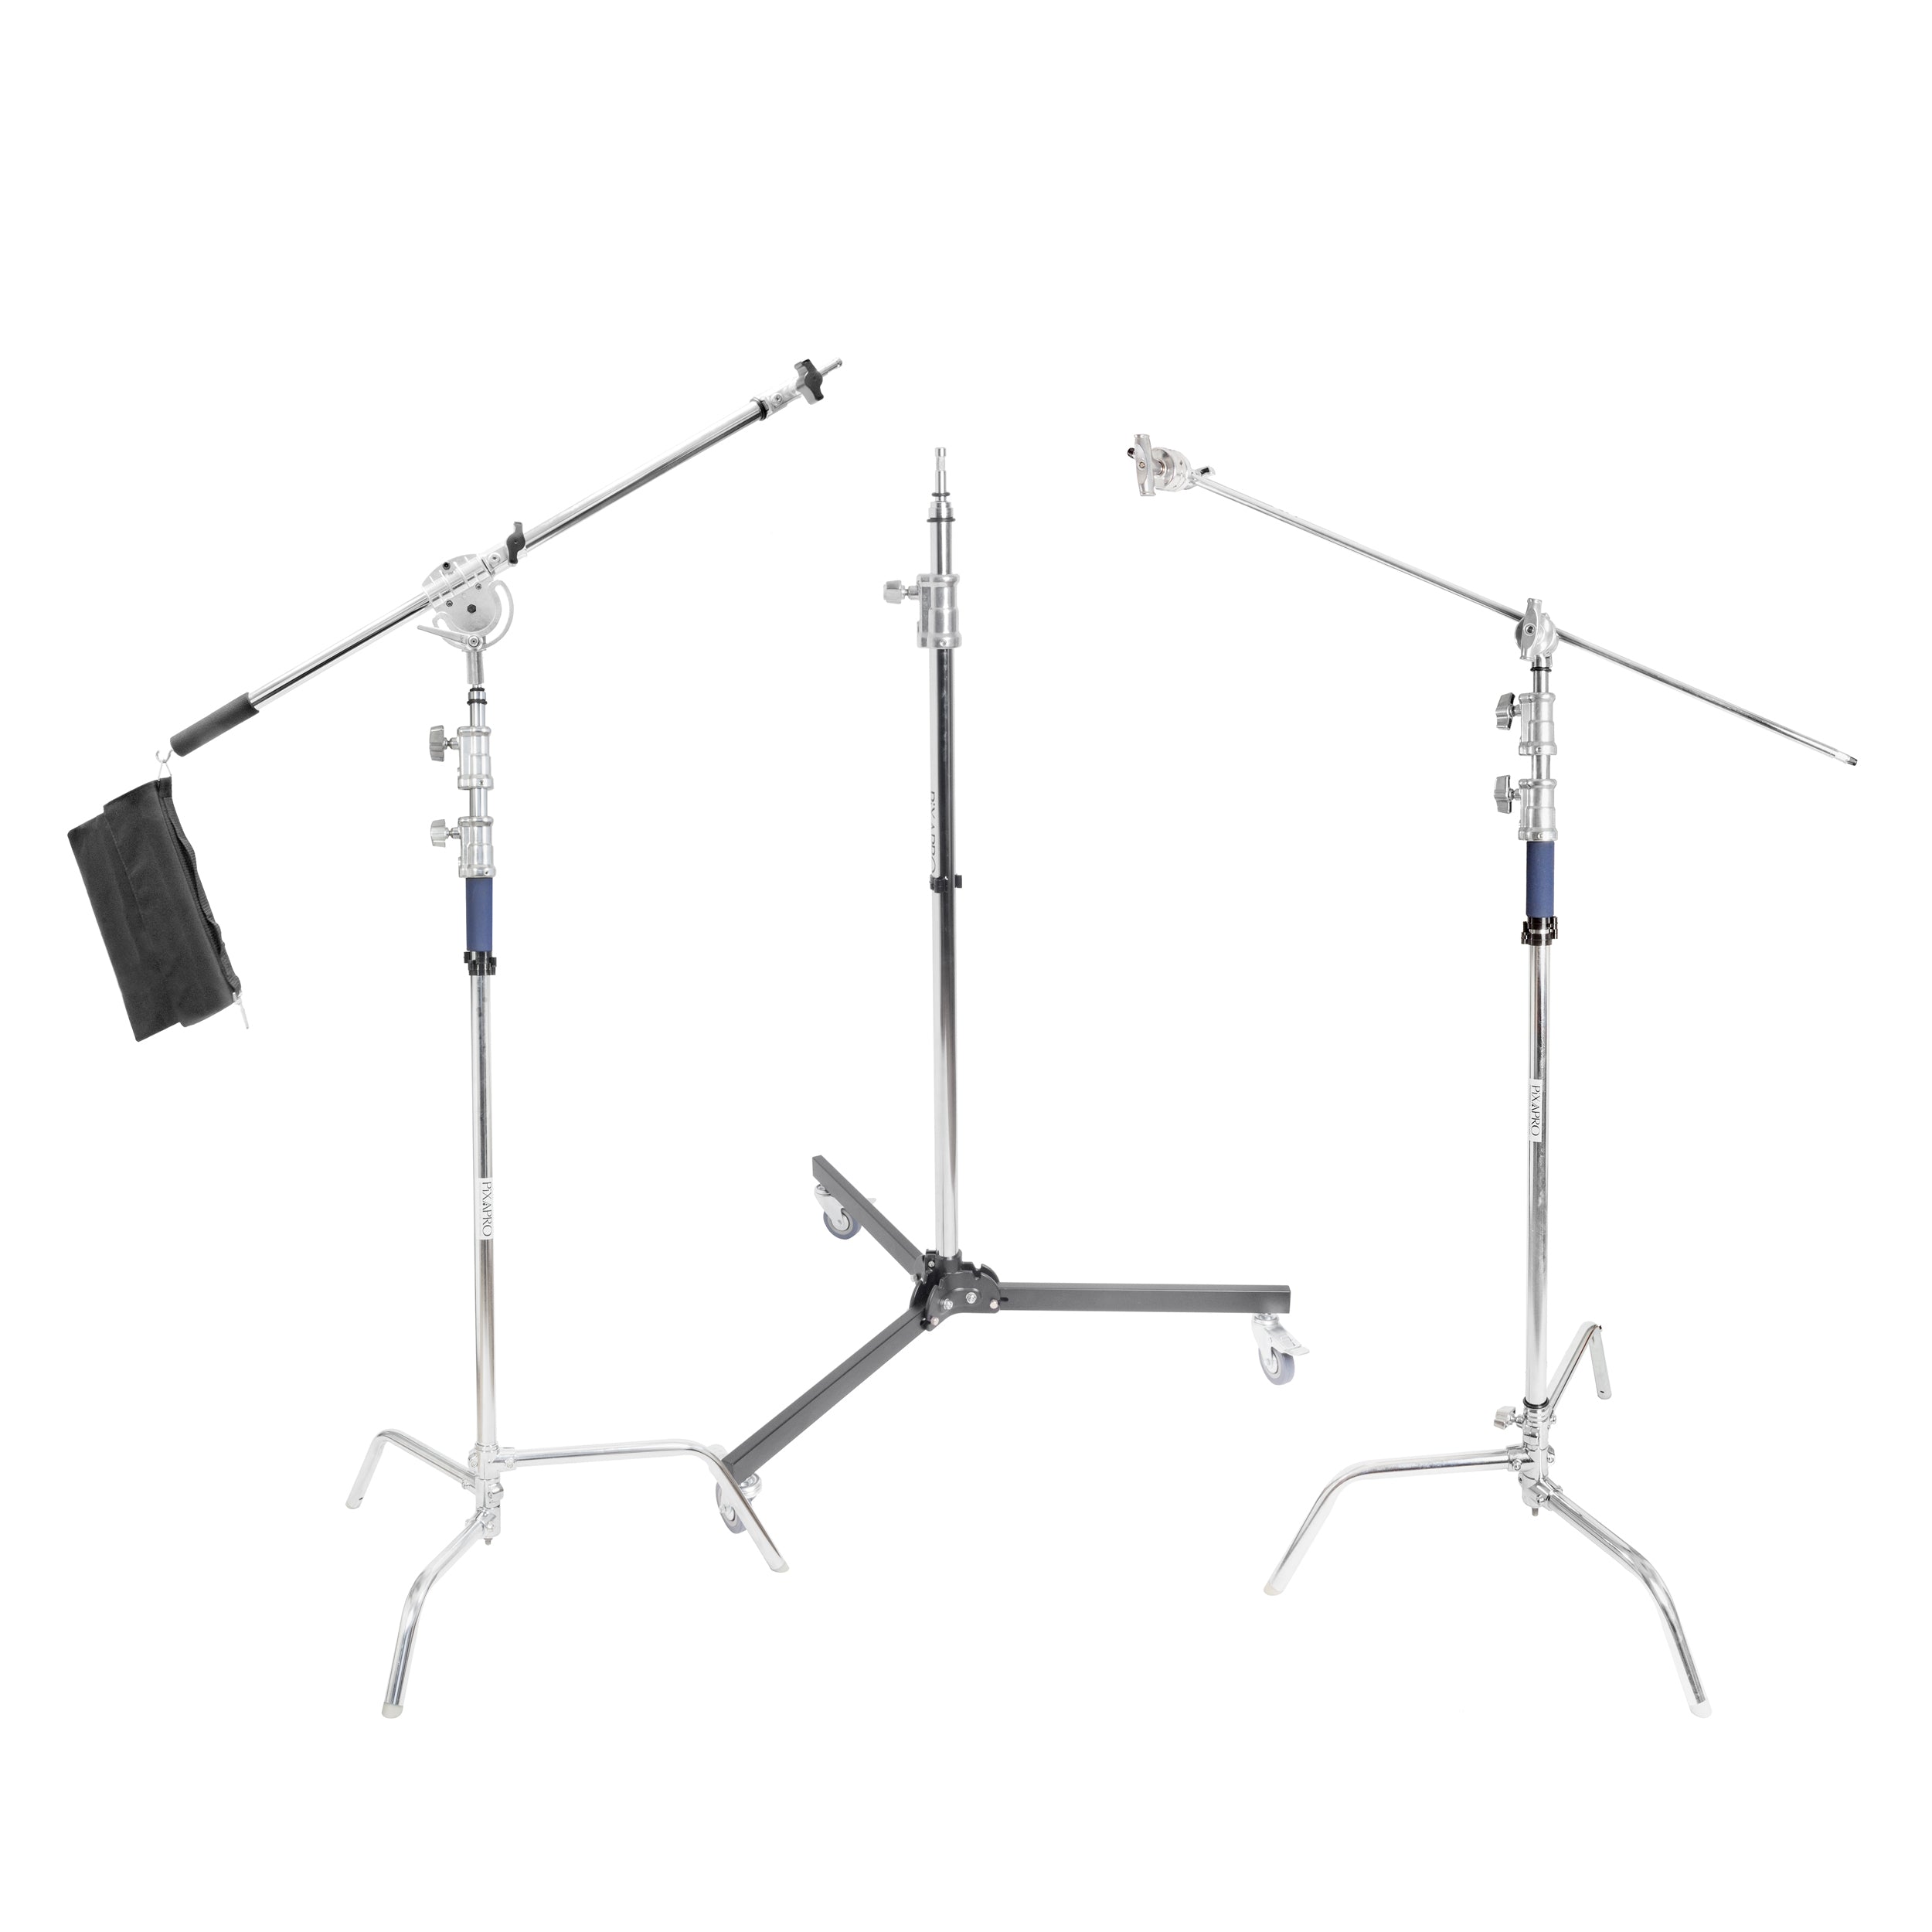 Pixapro turtle-Case C-Stand with Heavy Duty Boom,  228cm Tube stand, and 300cm Turtle Base C-Stand with 50-inch Grip boom